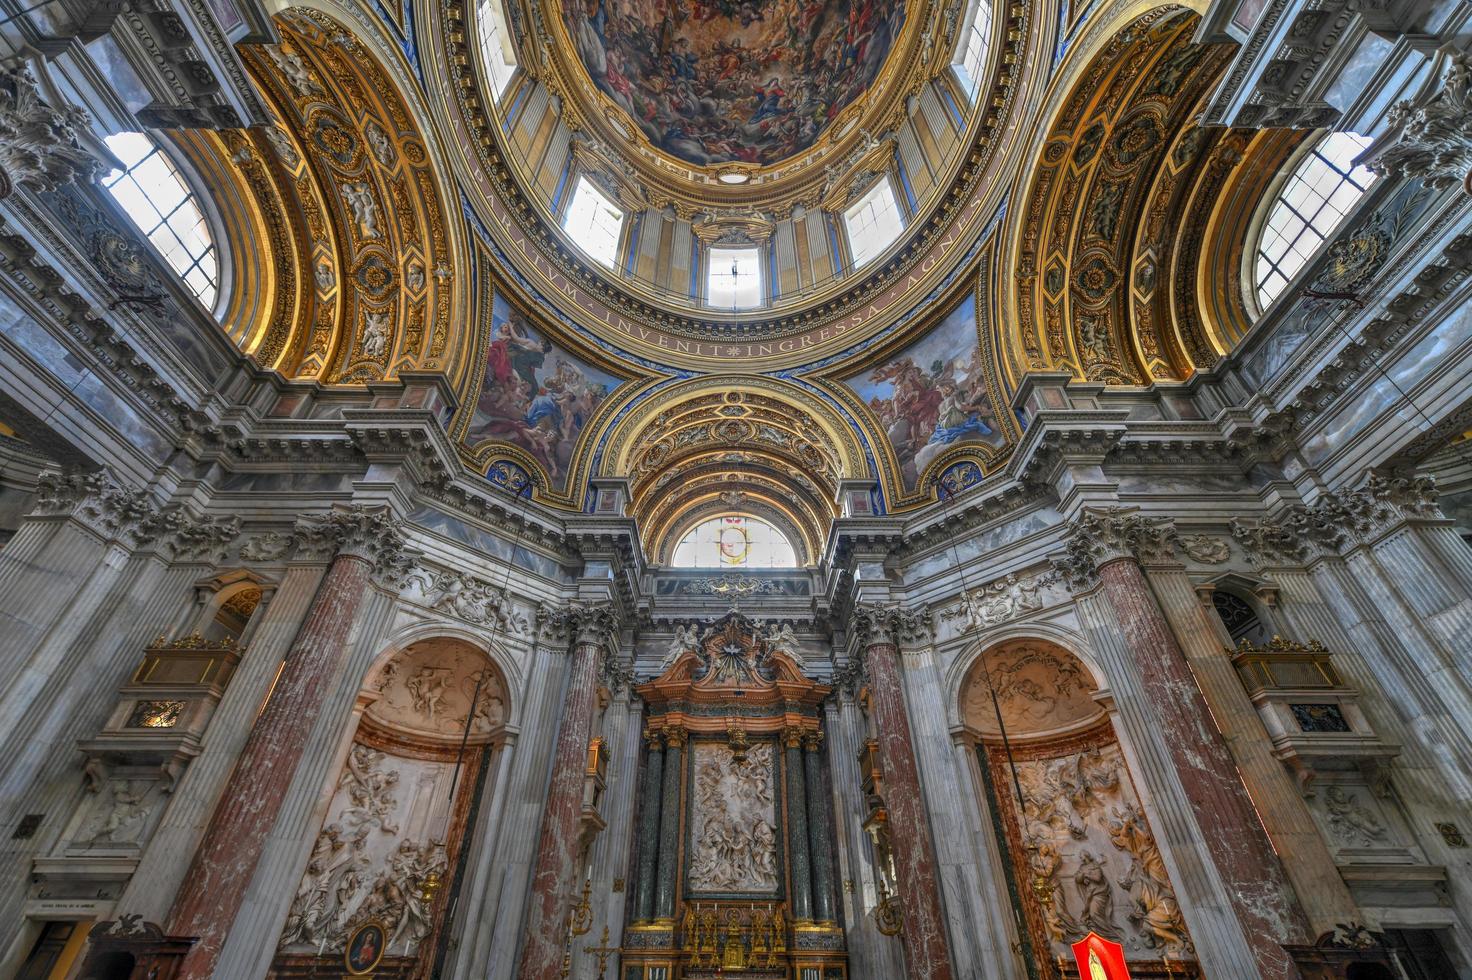 Rome, Italy - March 23, 2018 -  The church of Sant'Agnese in Agone is one of the most visited churches in Rome due to its central position in the famous Piazza Navona in Rome, Italy. photo